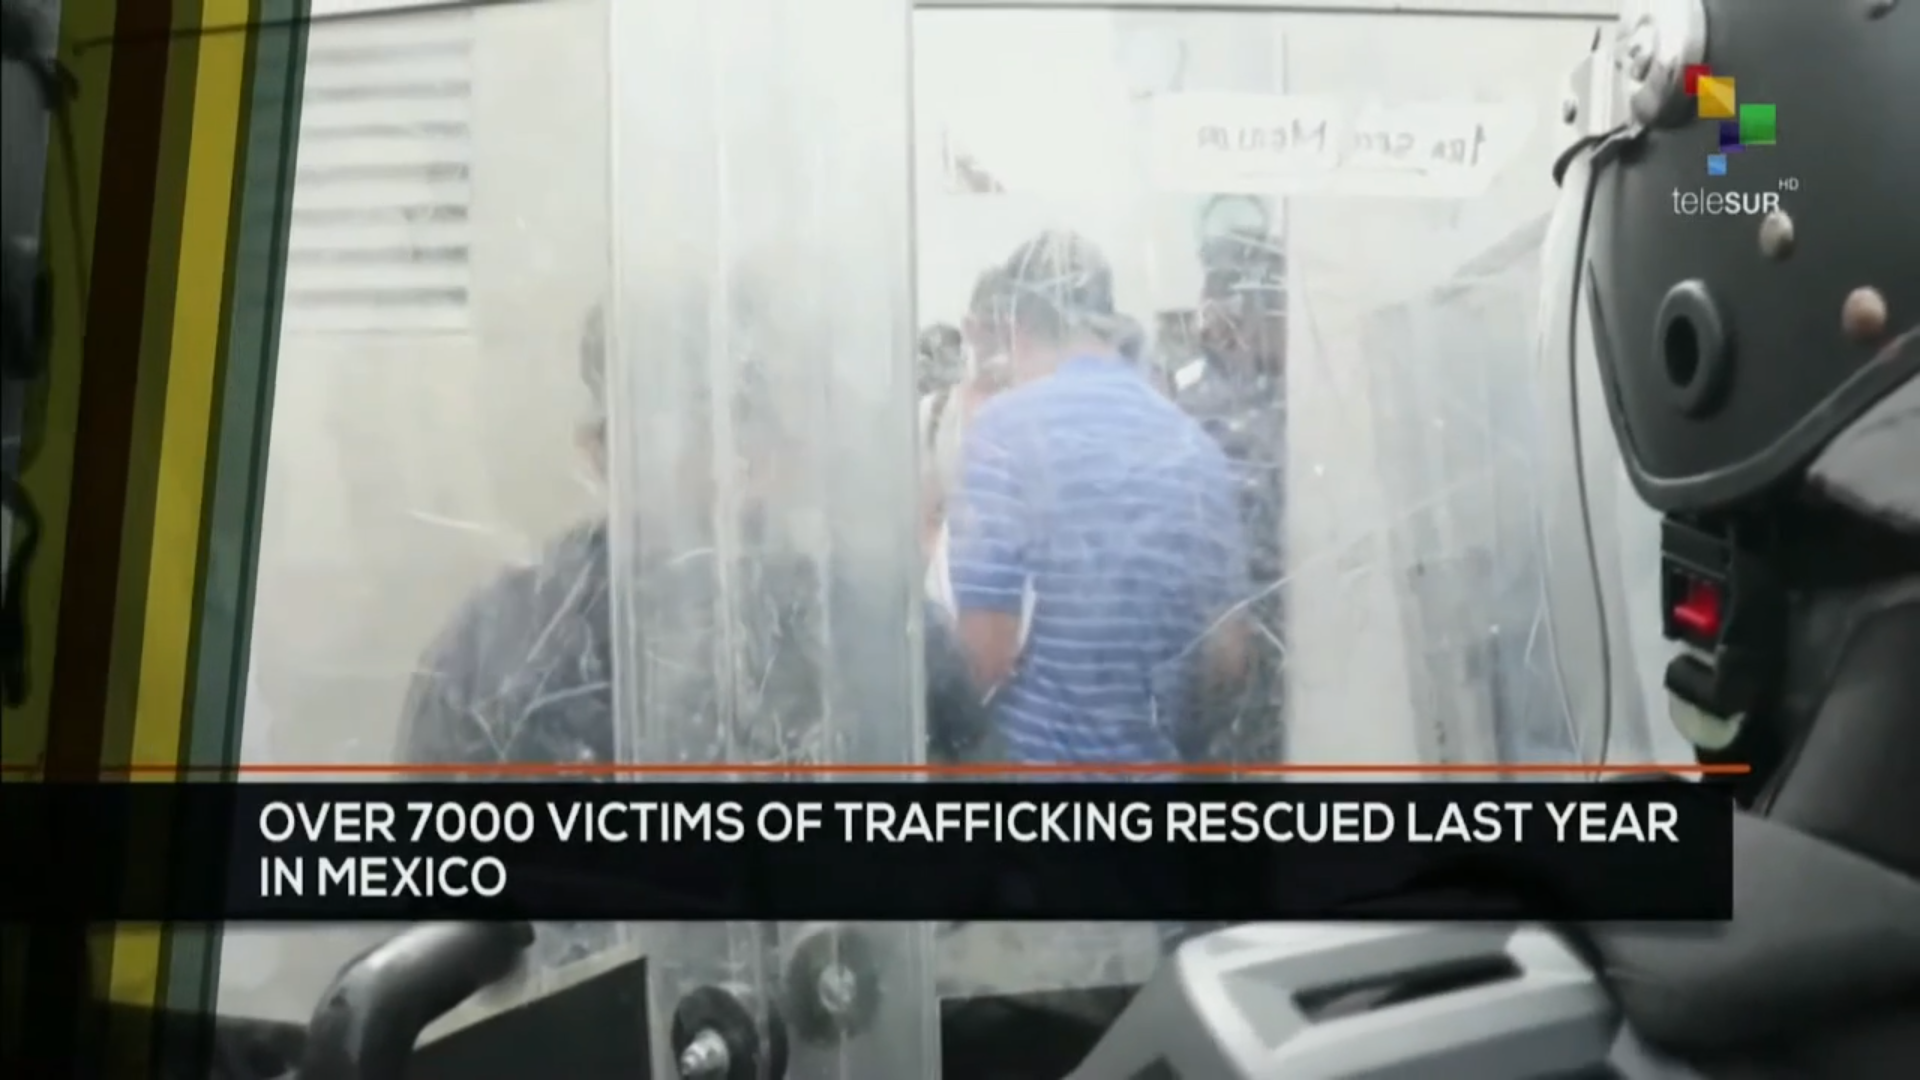 FTS 13-01 16:30 Over 7000 victims of trafficking rescued in Mexico